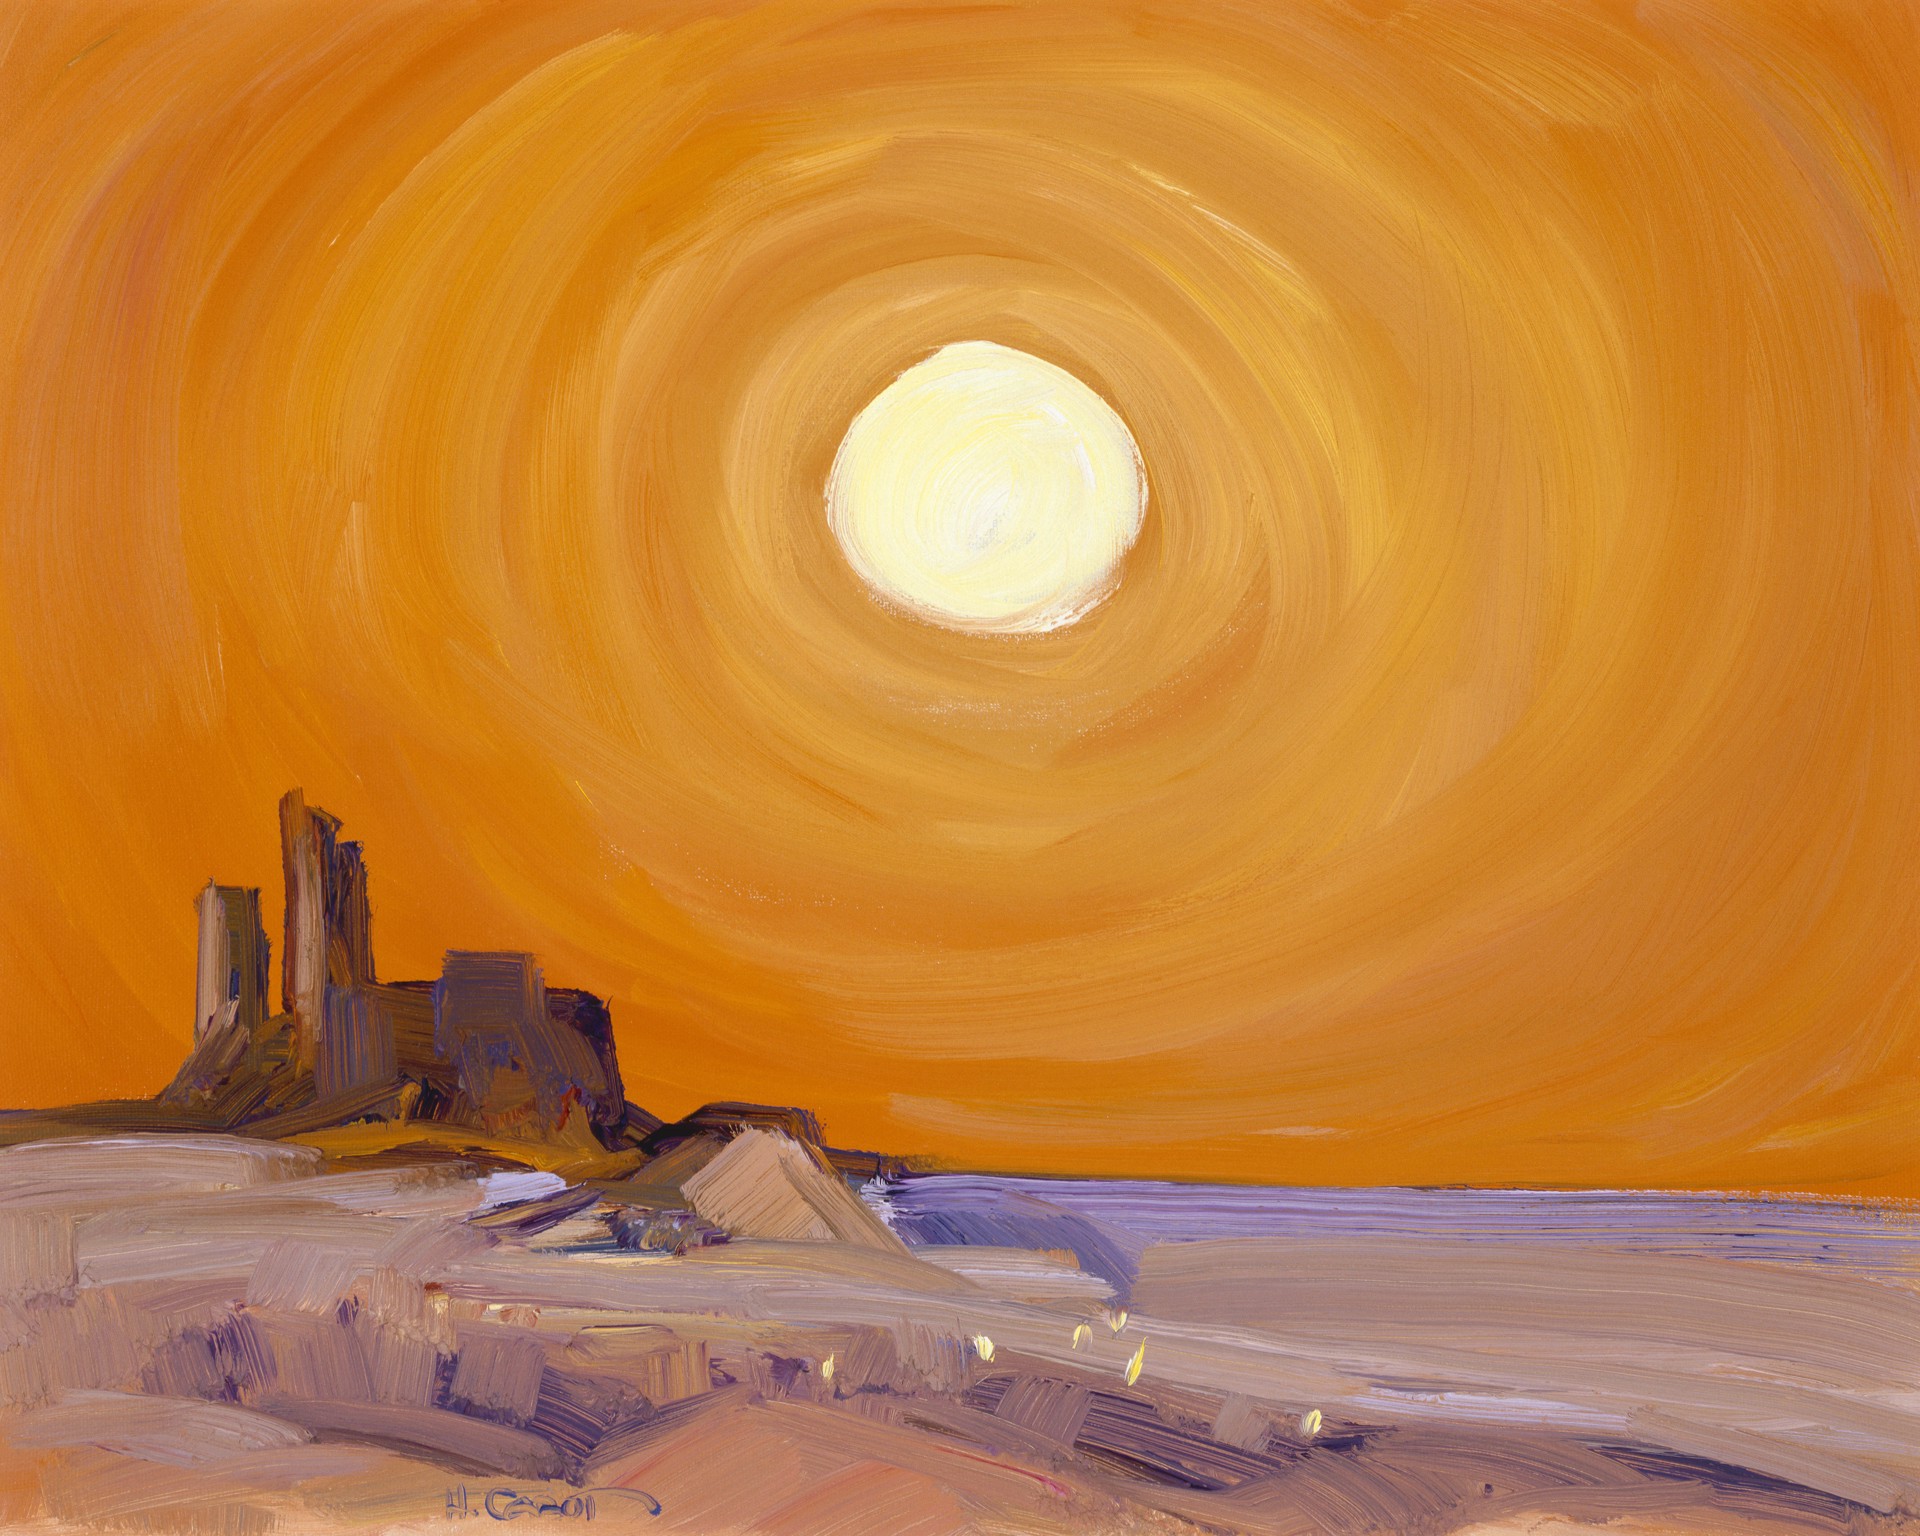 Bright Sun, Desert Mirage ~ Inquire to Order by Giclees Hugh Cabot